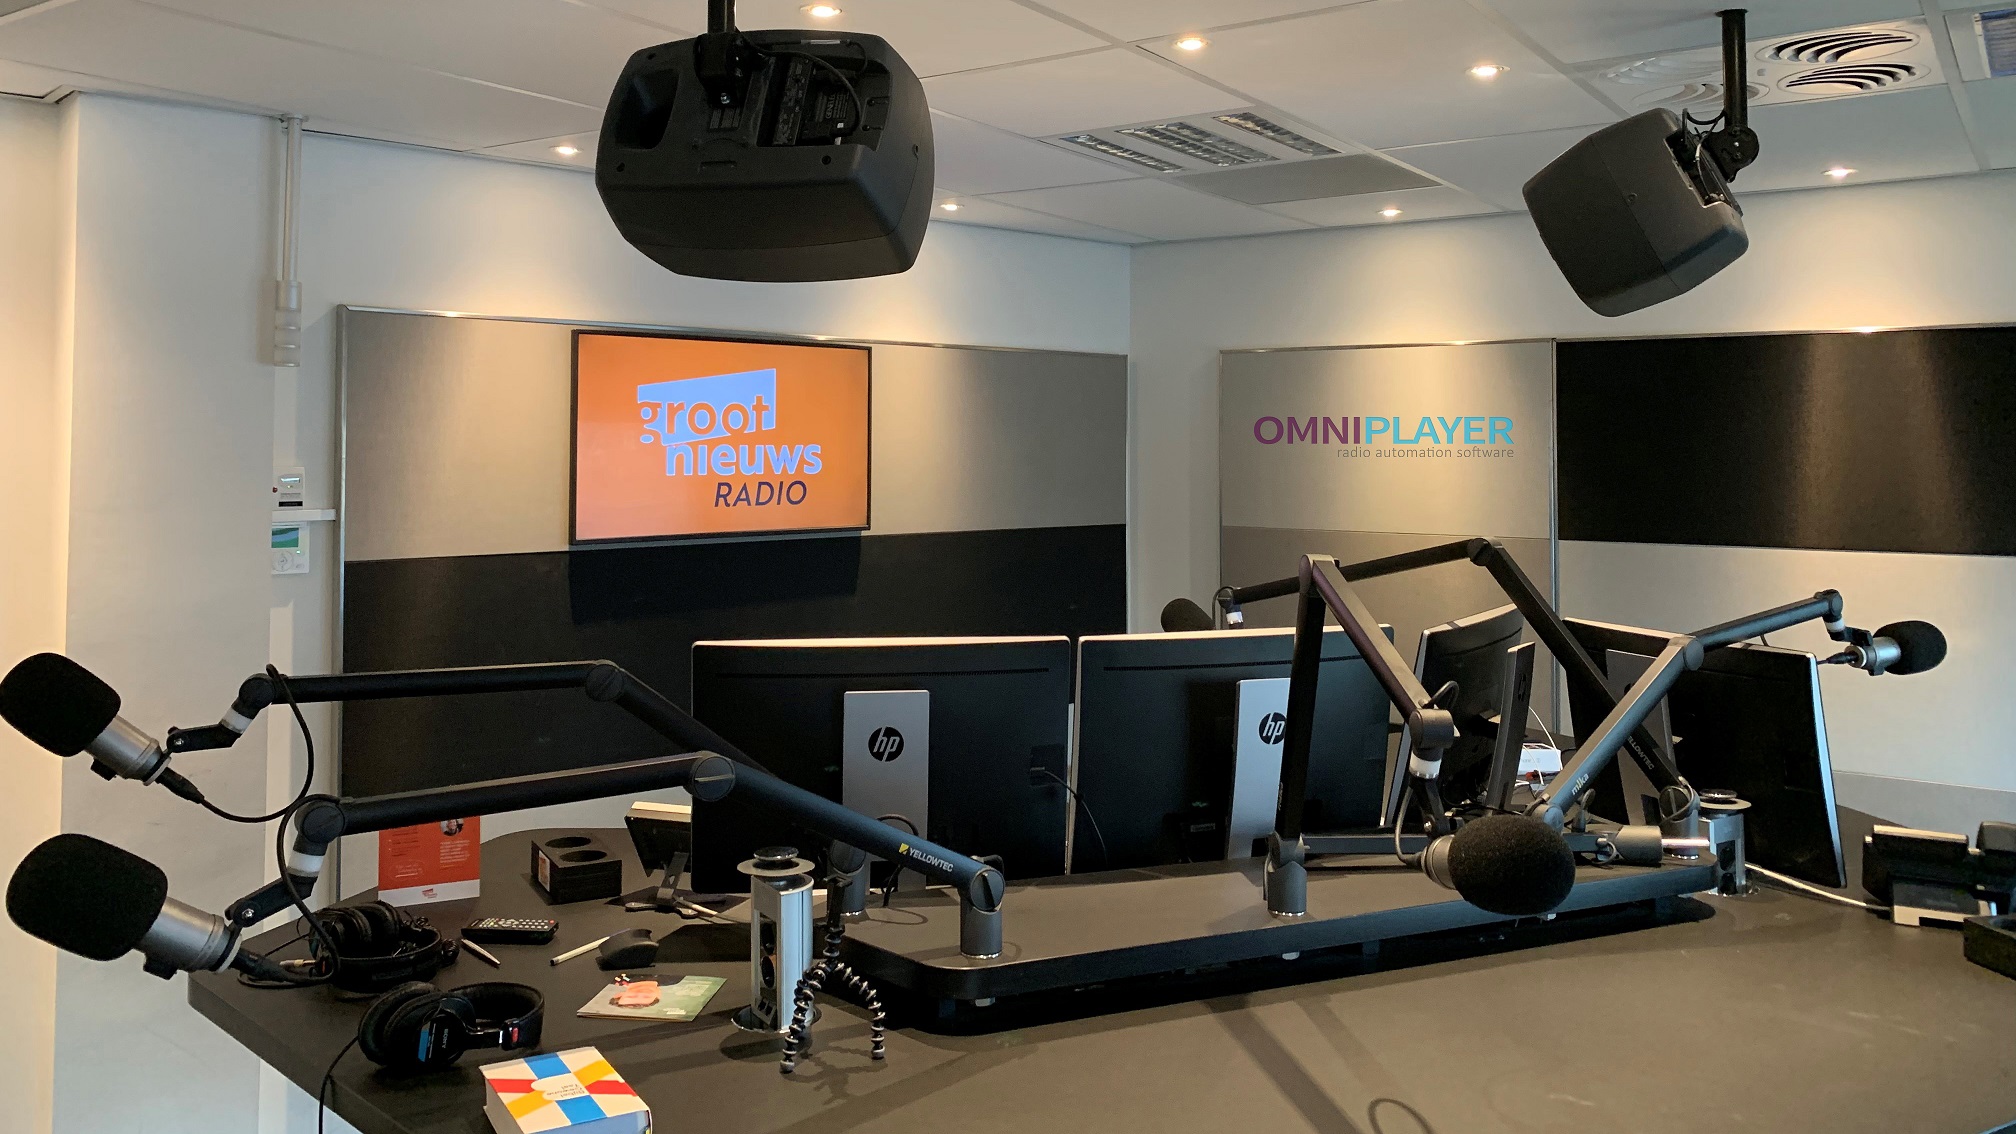 Groot Nieuws Radio switches to OmniPlayer